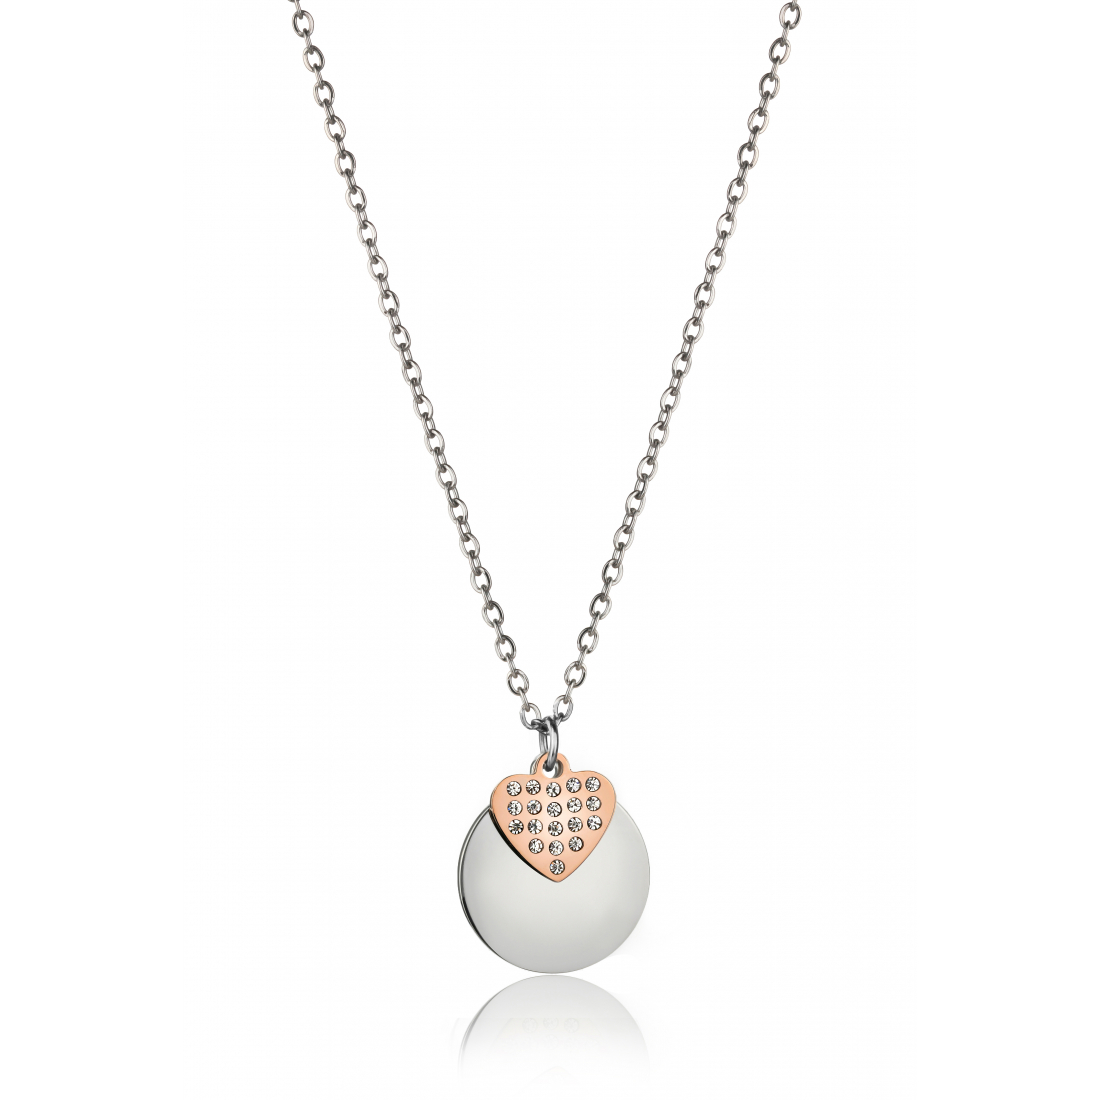 Women's 'Tinetto' Necklace